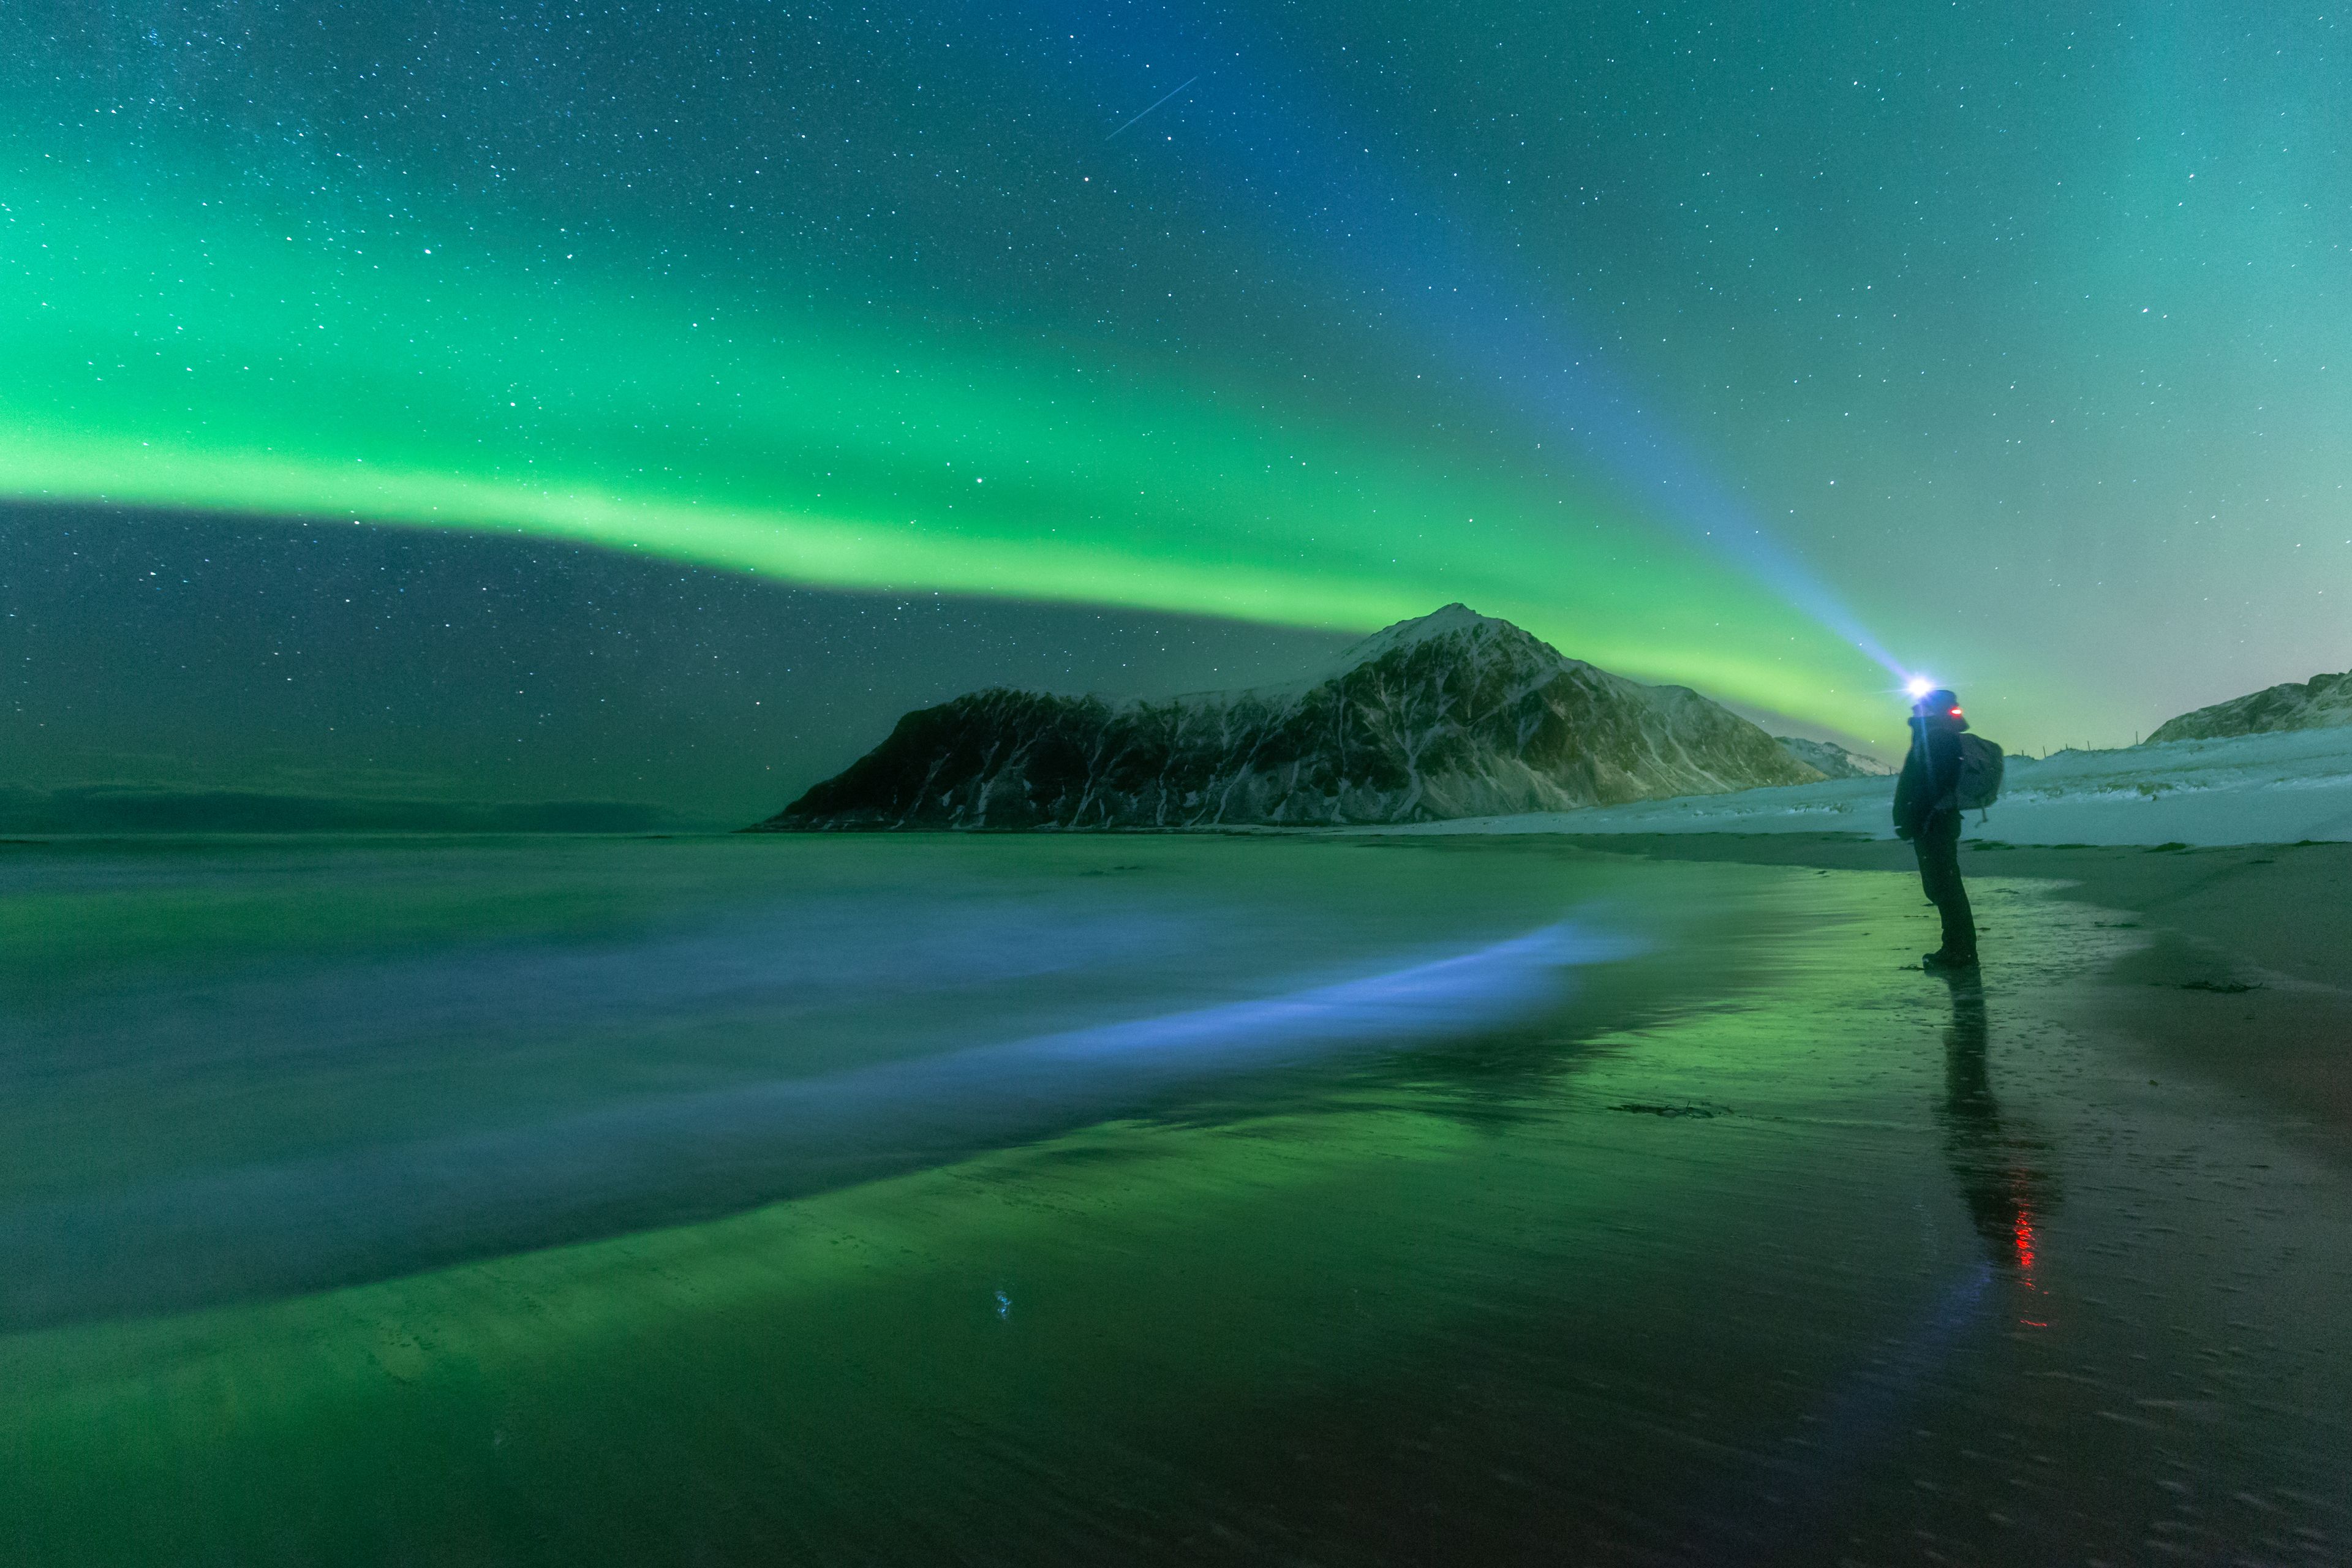 November in iceland: A picture of a person looking at the Northern Lights in Iceland during off season